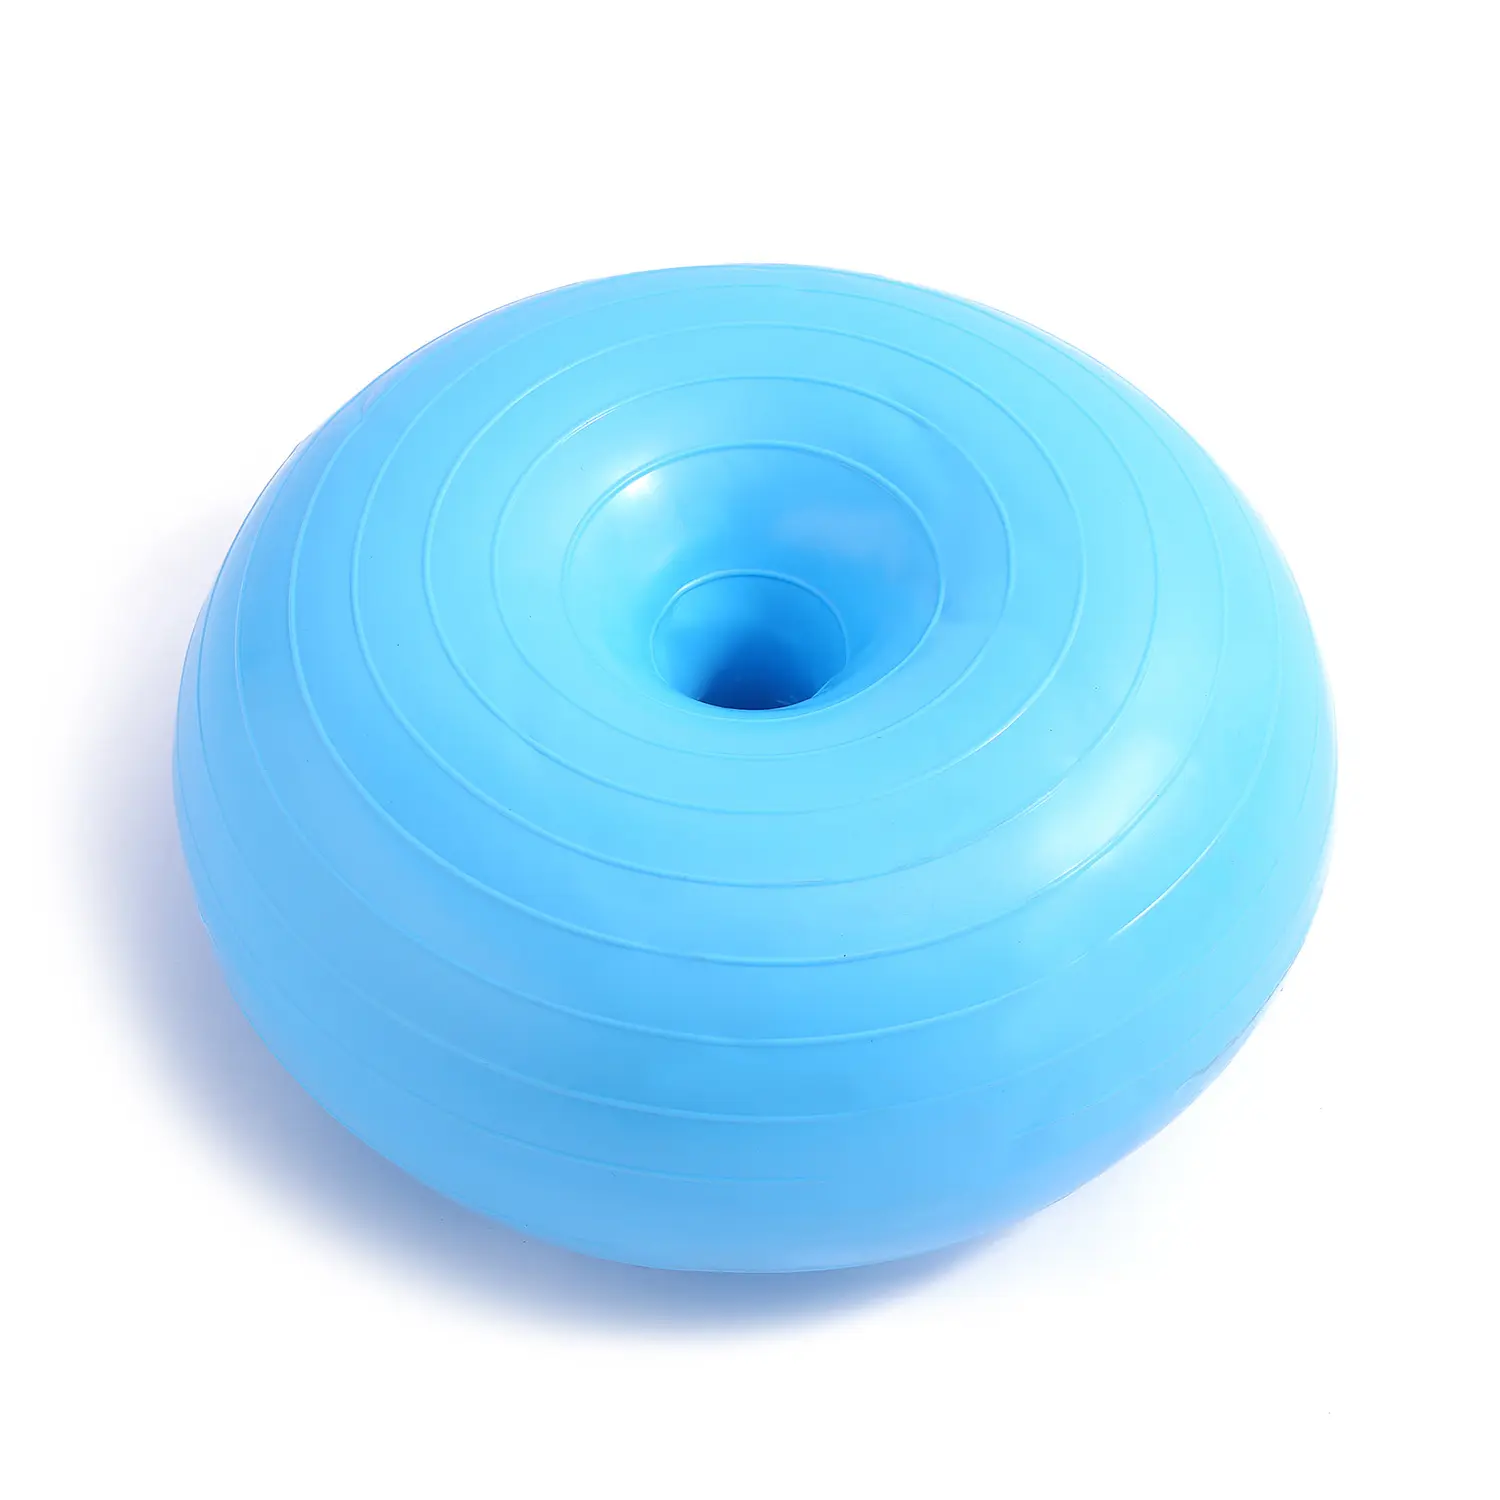 Hot selling high quality gym fitness balance workout exercise inflatable anti burst PVC donuts yoga ball